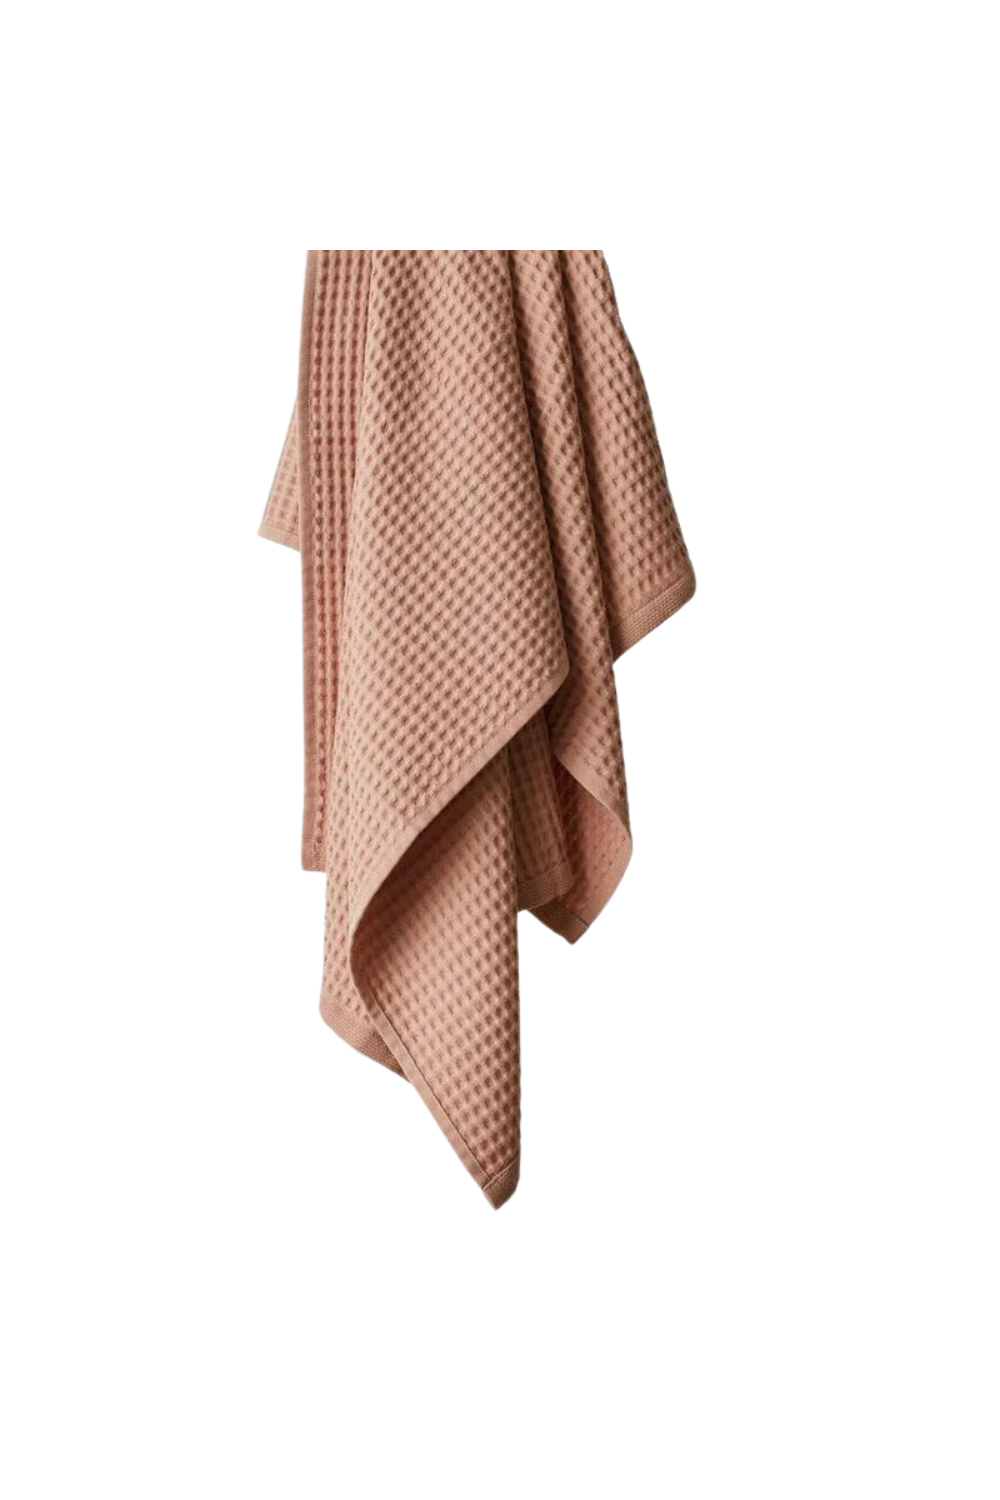 The Citizenry Waffle Towel